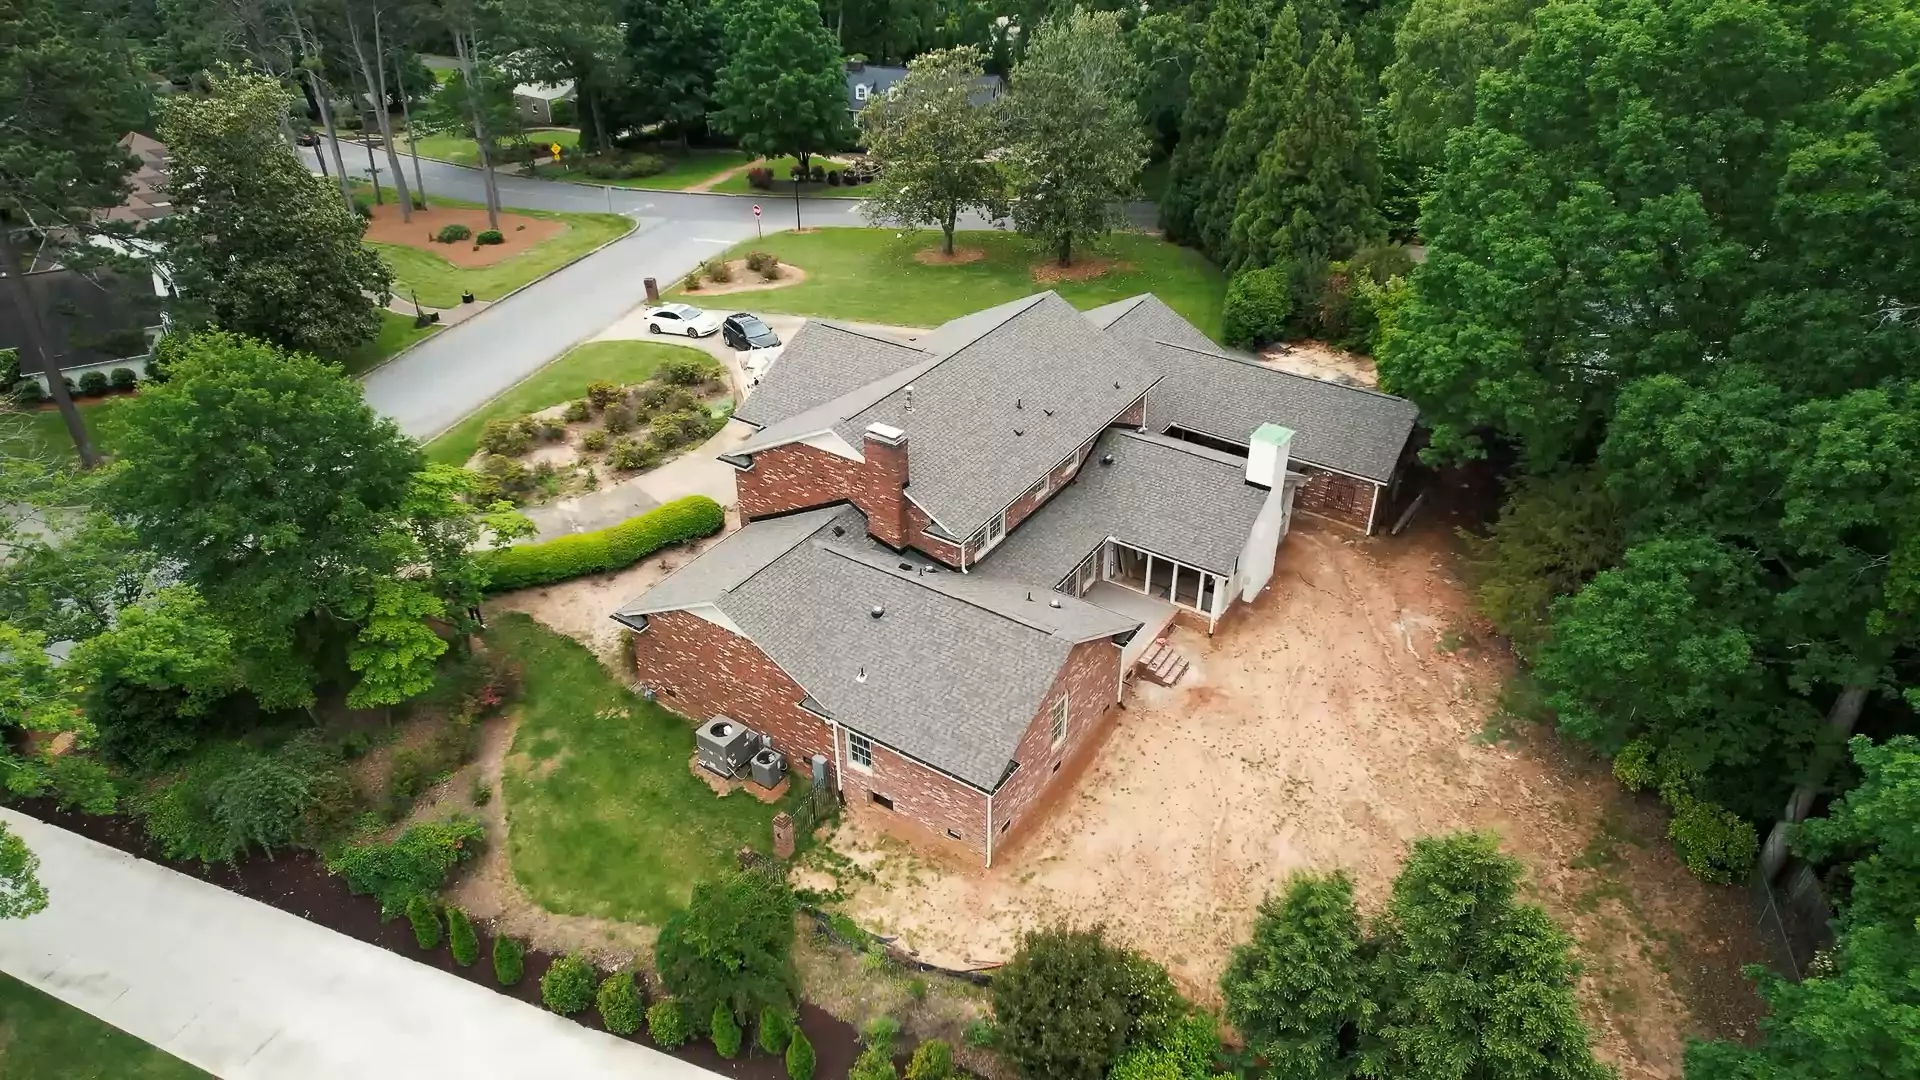 Beautifully executed shingle roof replacement by Generation Roofing, enhancing the curb appeal of an Upstate South Carolina home.